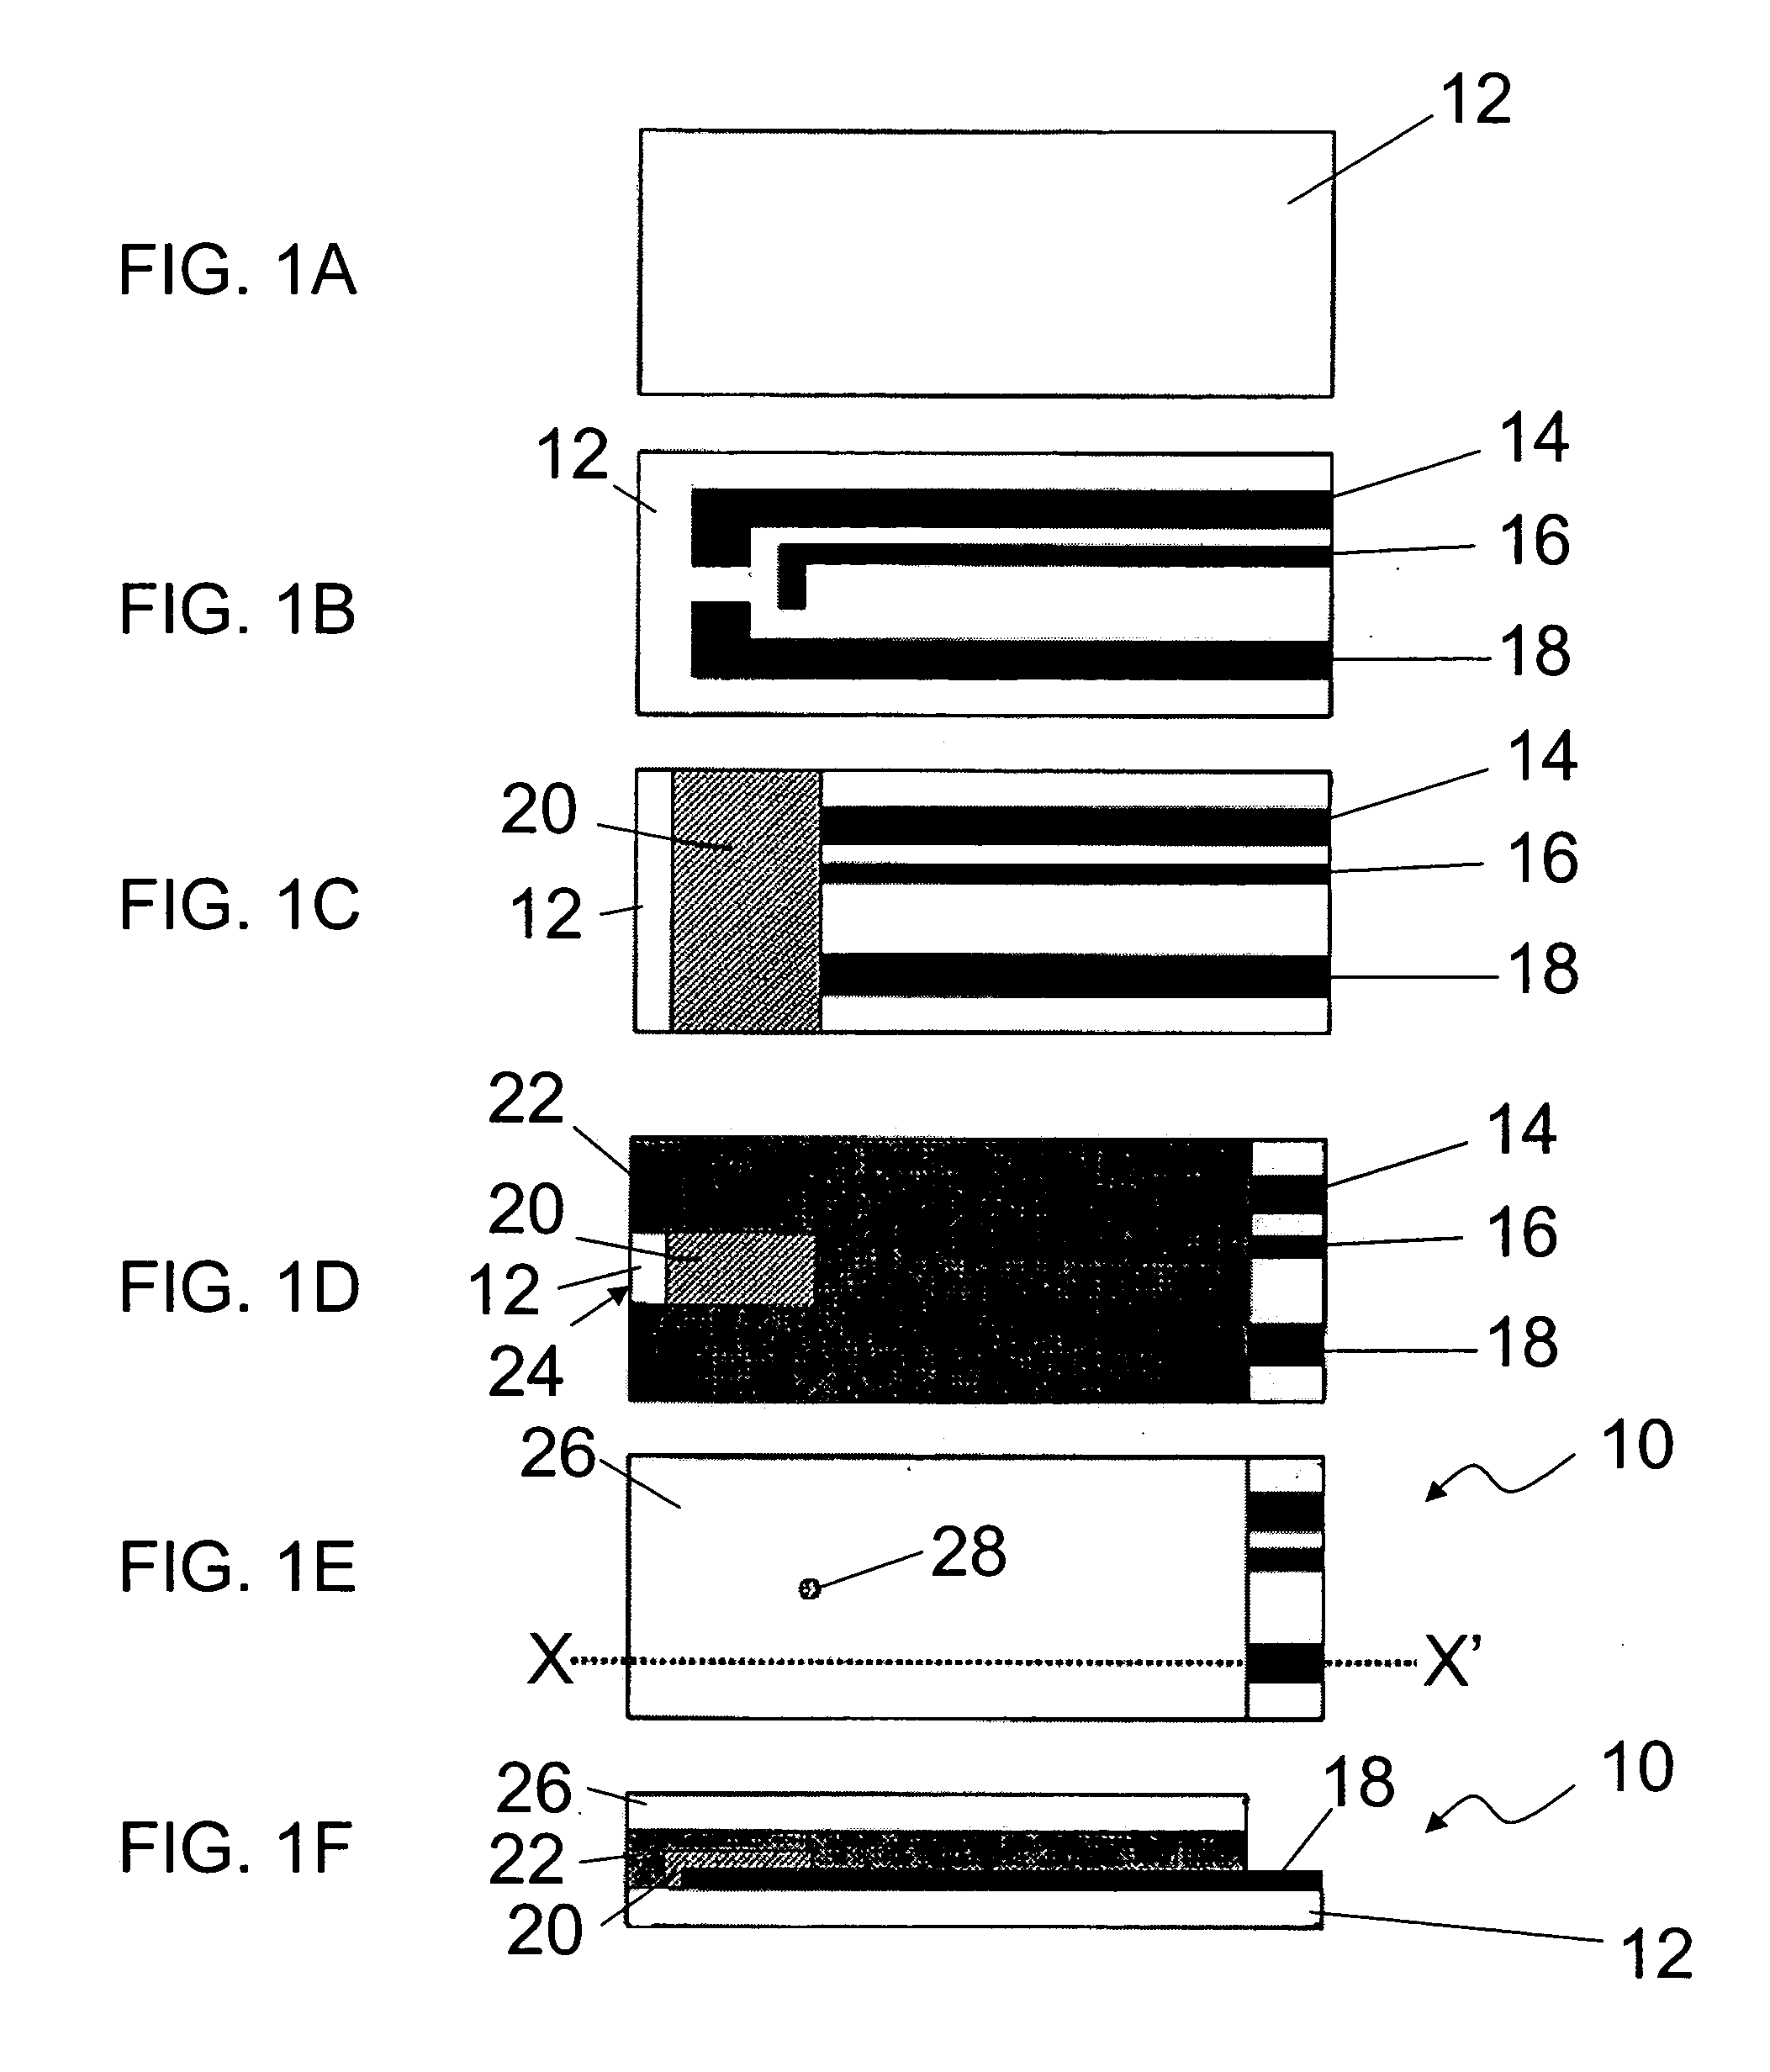 Method and system for error checking an electrochemical sensor